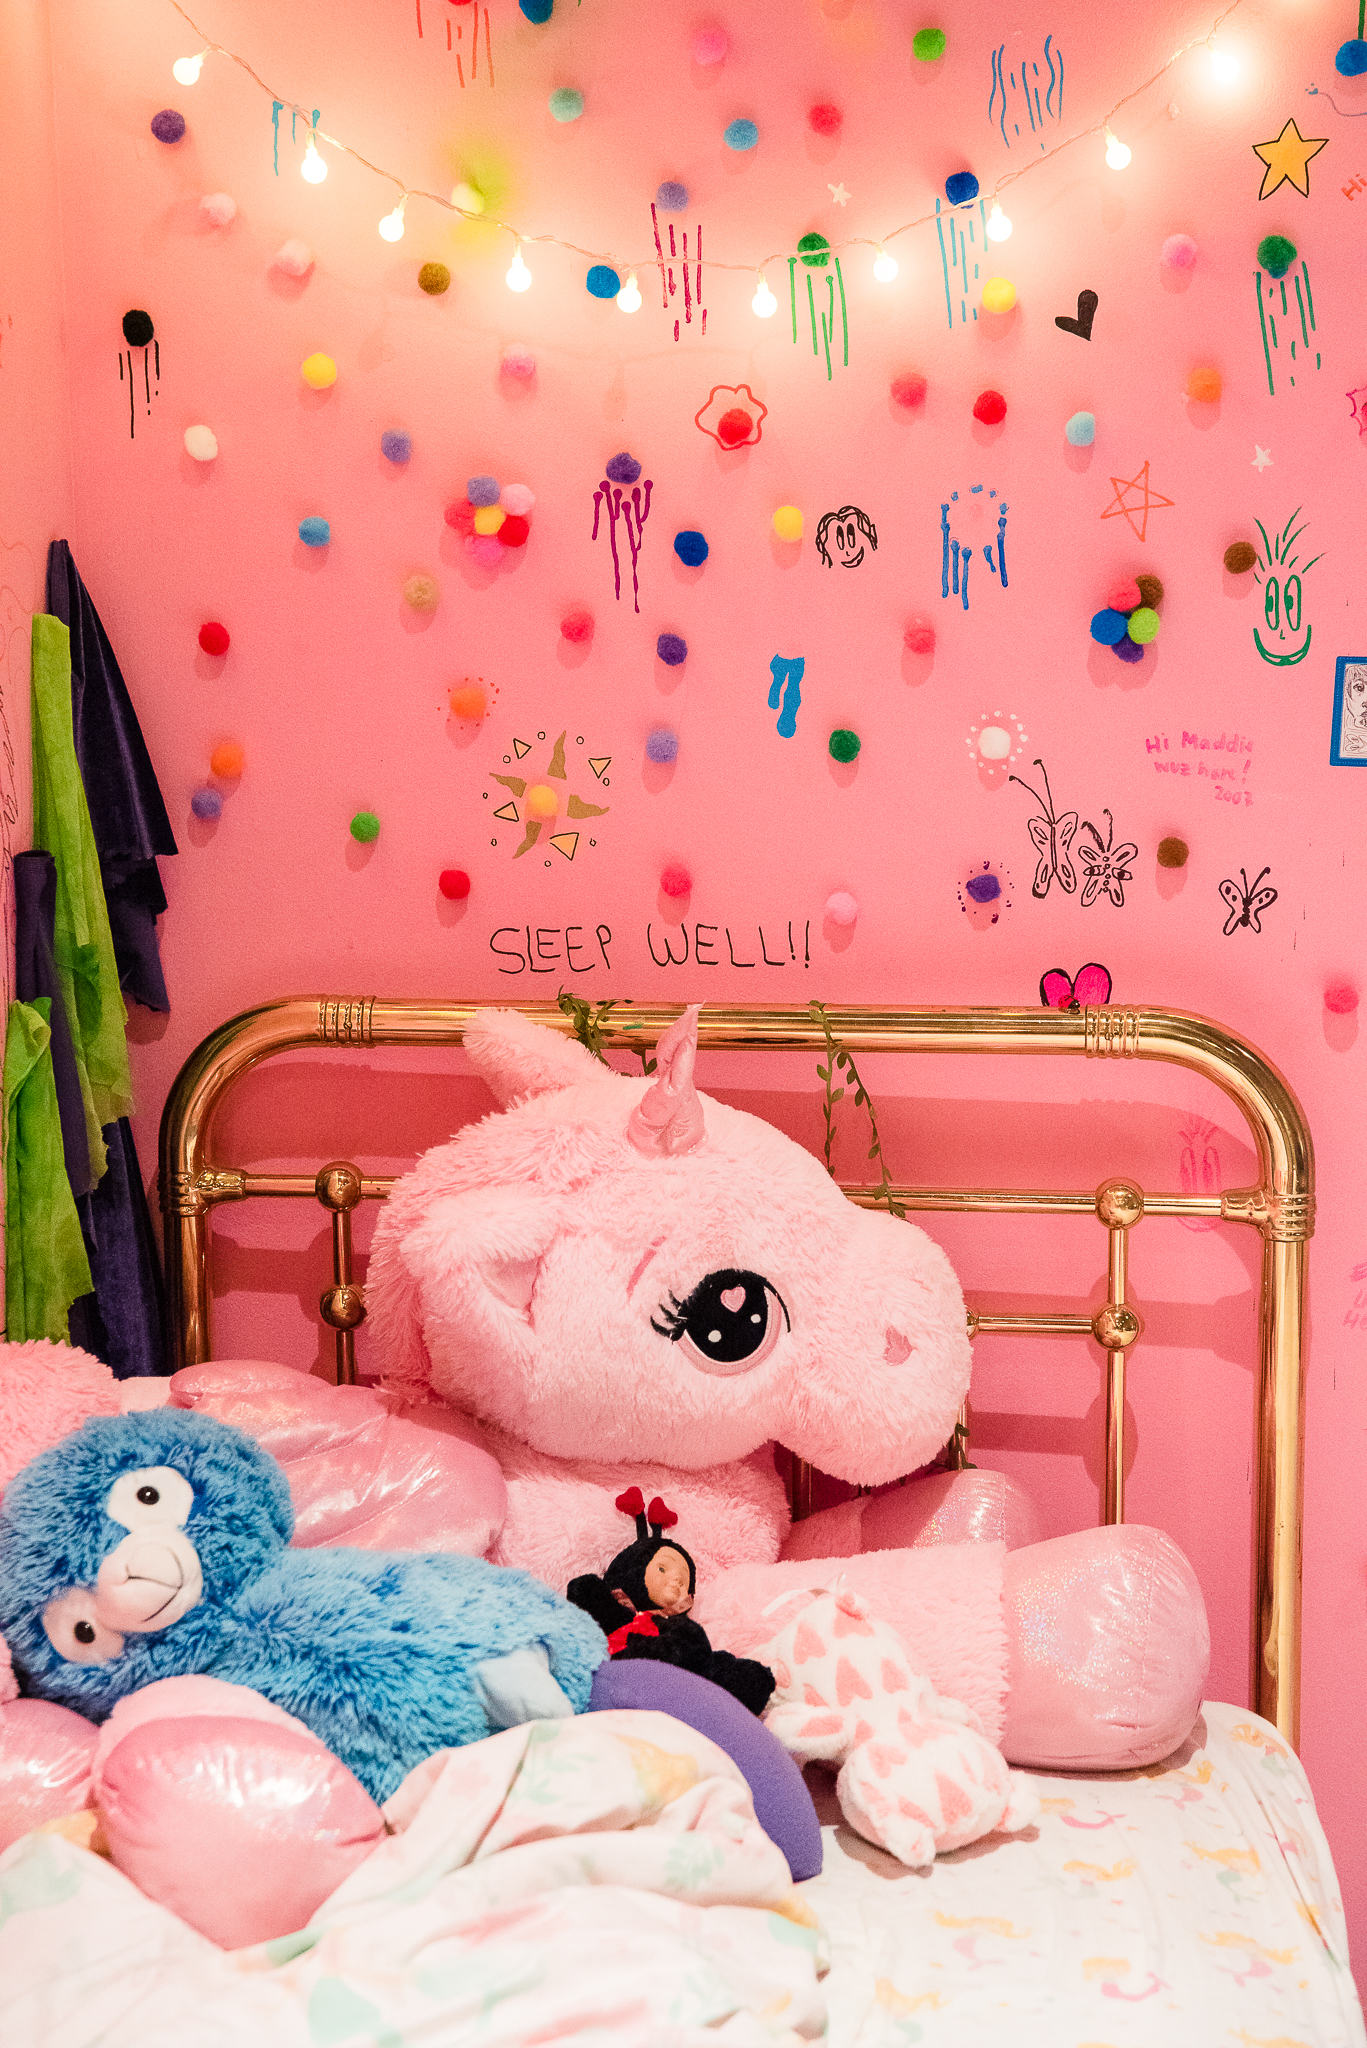  Corner of a gallery space that is bright pink. There are little colorful pom poms and string lights affixed to the wall. In view, there’s a pink unicorn laying in a bed with a gold bed frame. Above the bed frame on the wall is text that reads, “sleep well!!”